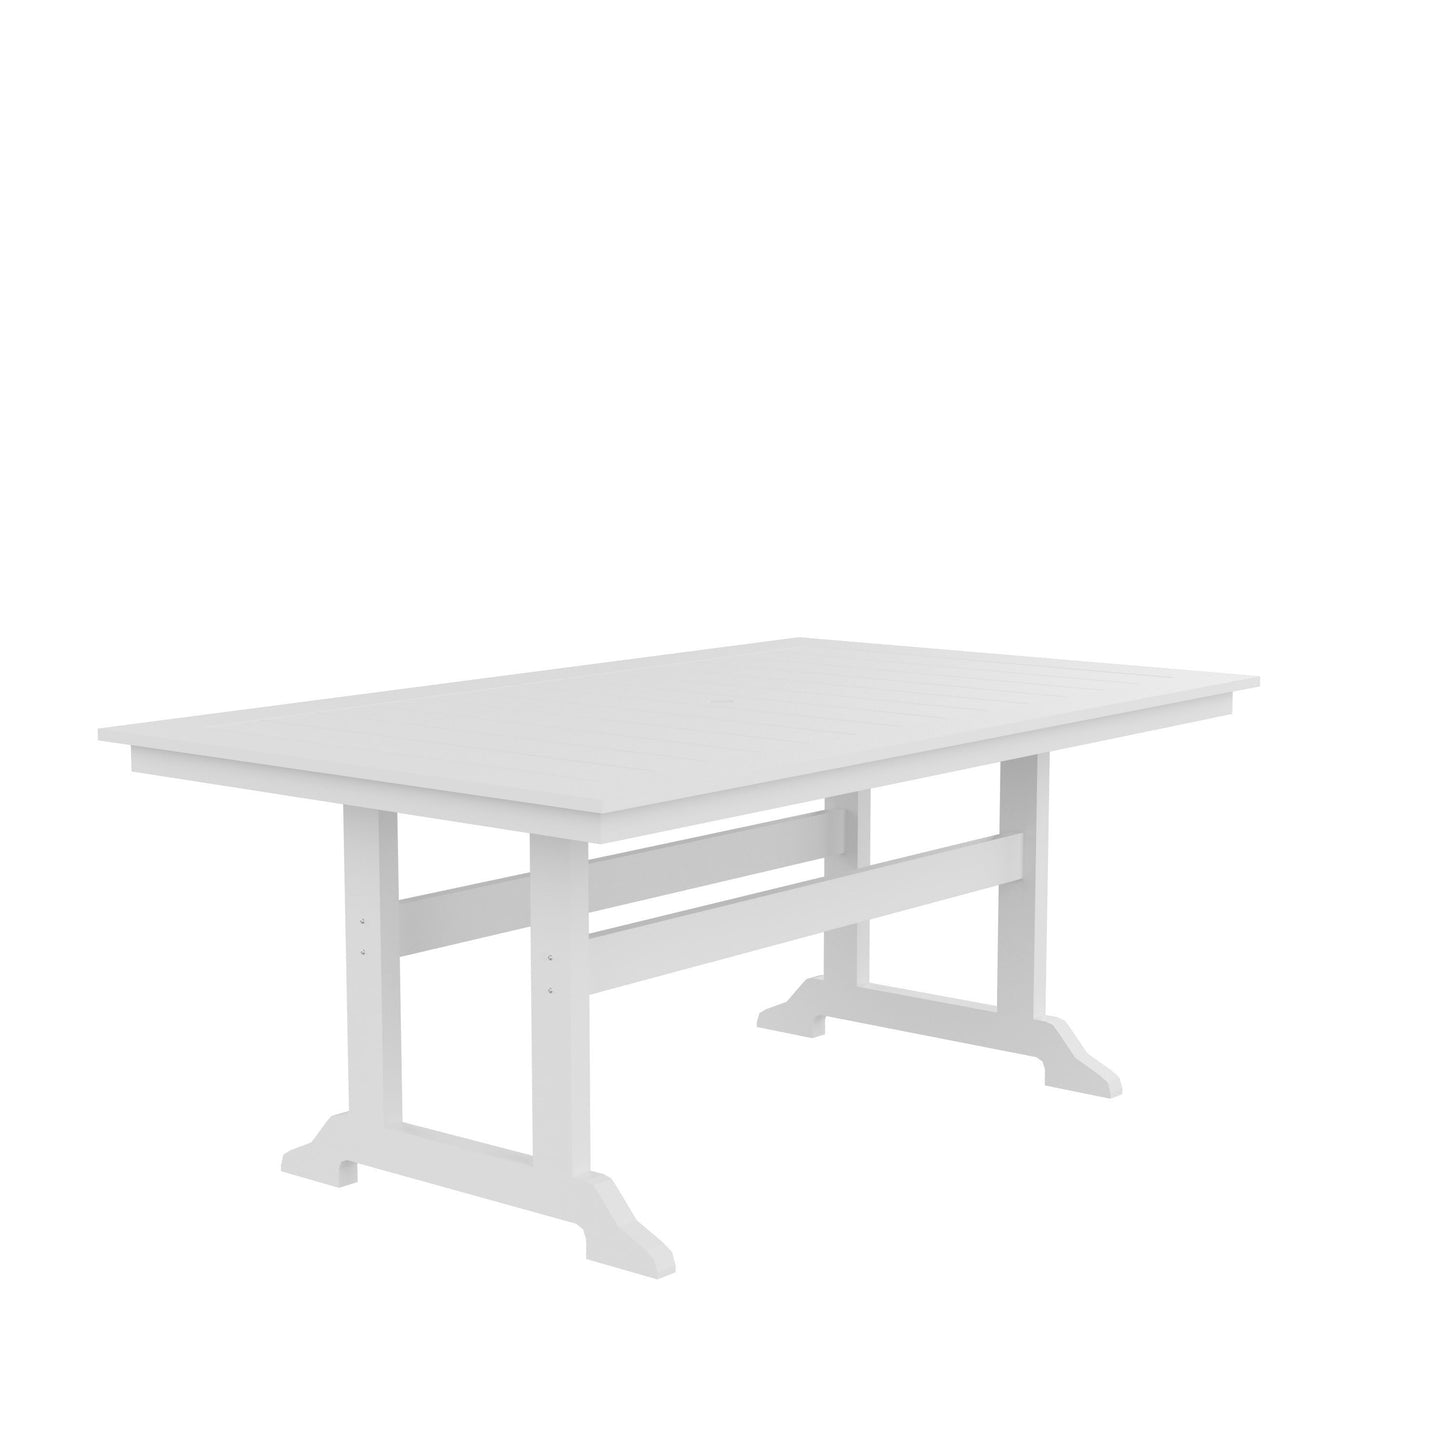 HDPE Dining Table, White